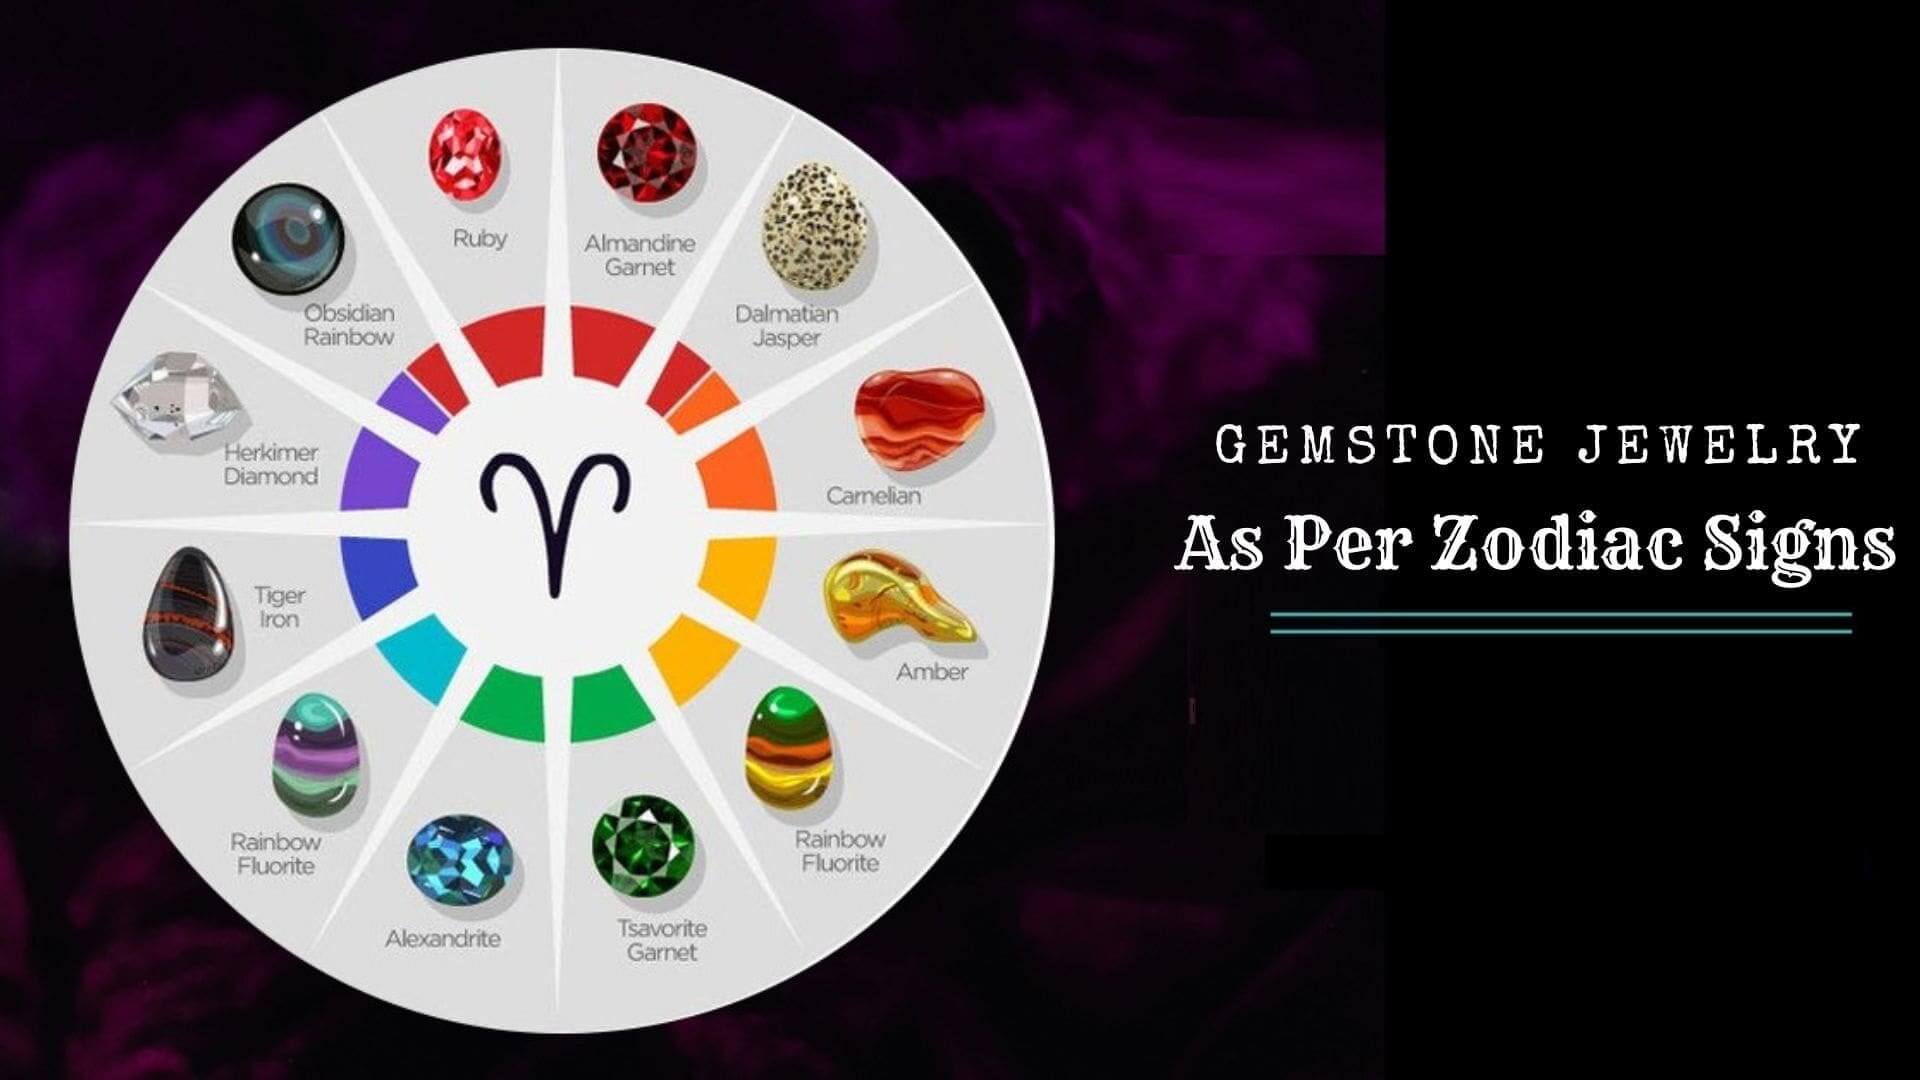 Gemstone Jewelry As Per Zodiac Signs: Discover The Right Gemstone for ...